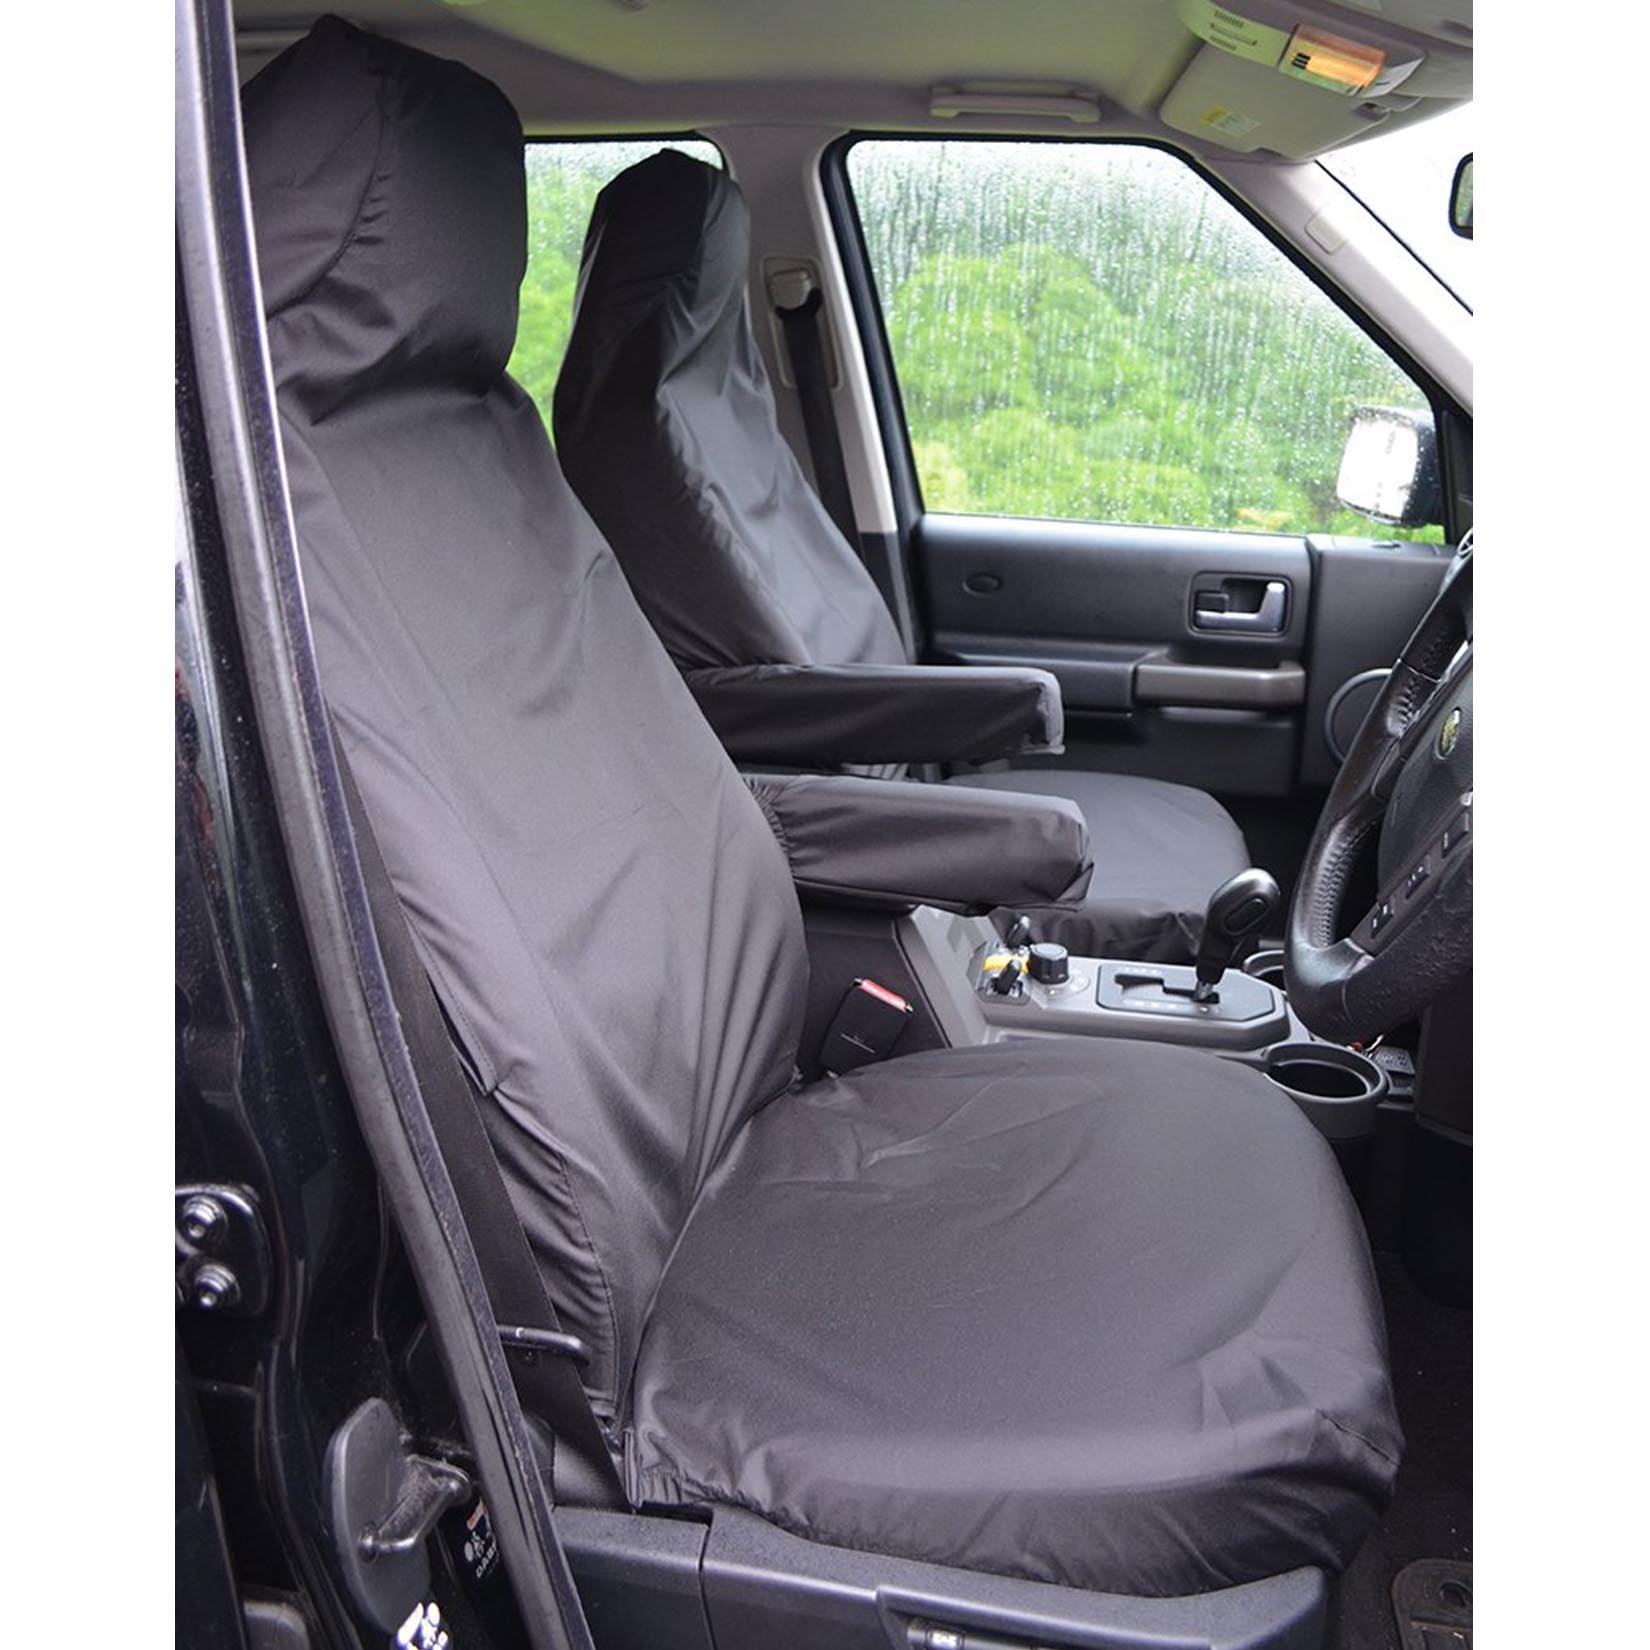 LAND ROVER DISCOVERY 3 4 FRONT SEAT COVERS – WITH ARMRESTS - BLACK - Storm Xccessories2